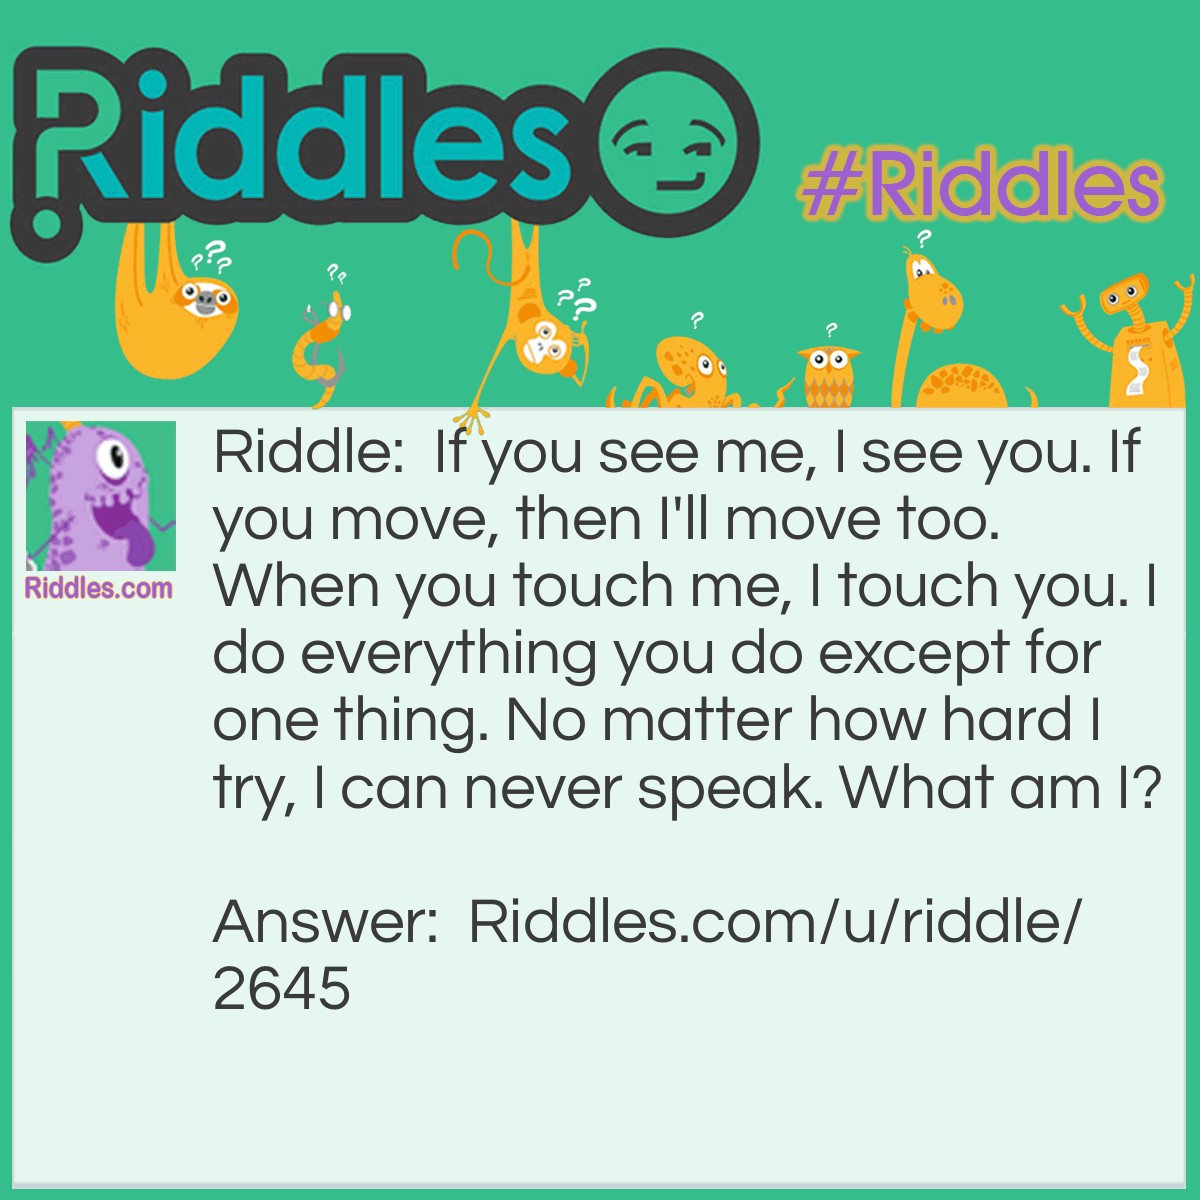 Riddle: If you see me, I see you. If you move, then I'll move too. When you touch me, I touch you. I do everything you do except for one thing. No matter how hard I try, I can never speak. What am I? Answer: Your reflection in a mirror.